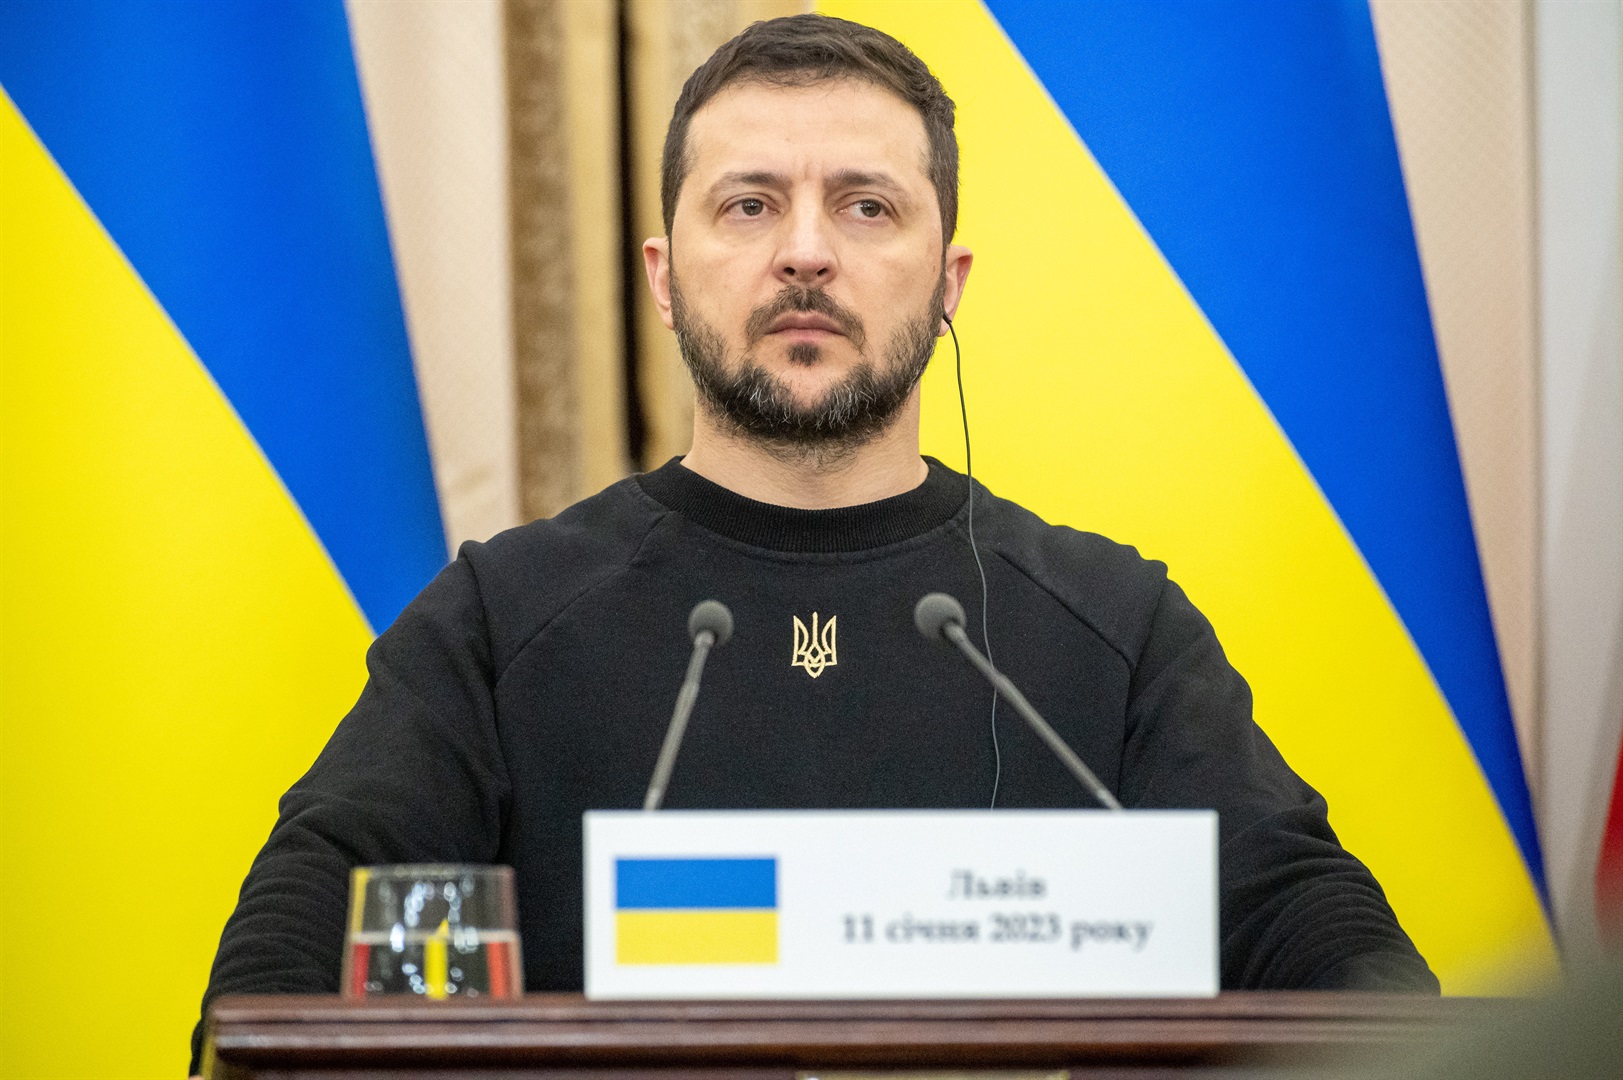 Businessinsider.co.za | Zelenskyy fired 9 top officials after complaints that government members went on vacation and took bribes